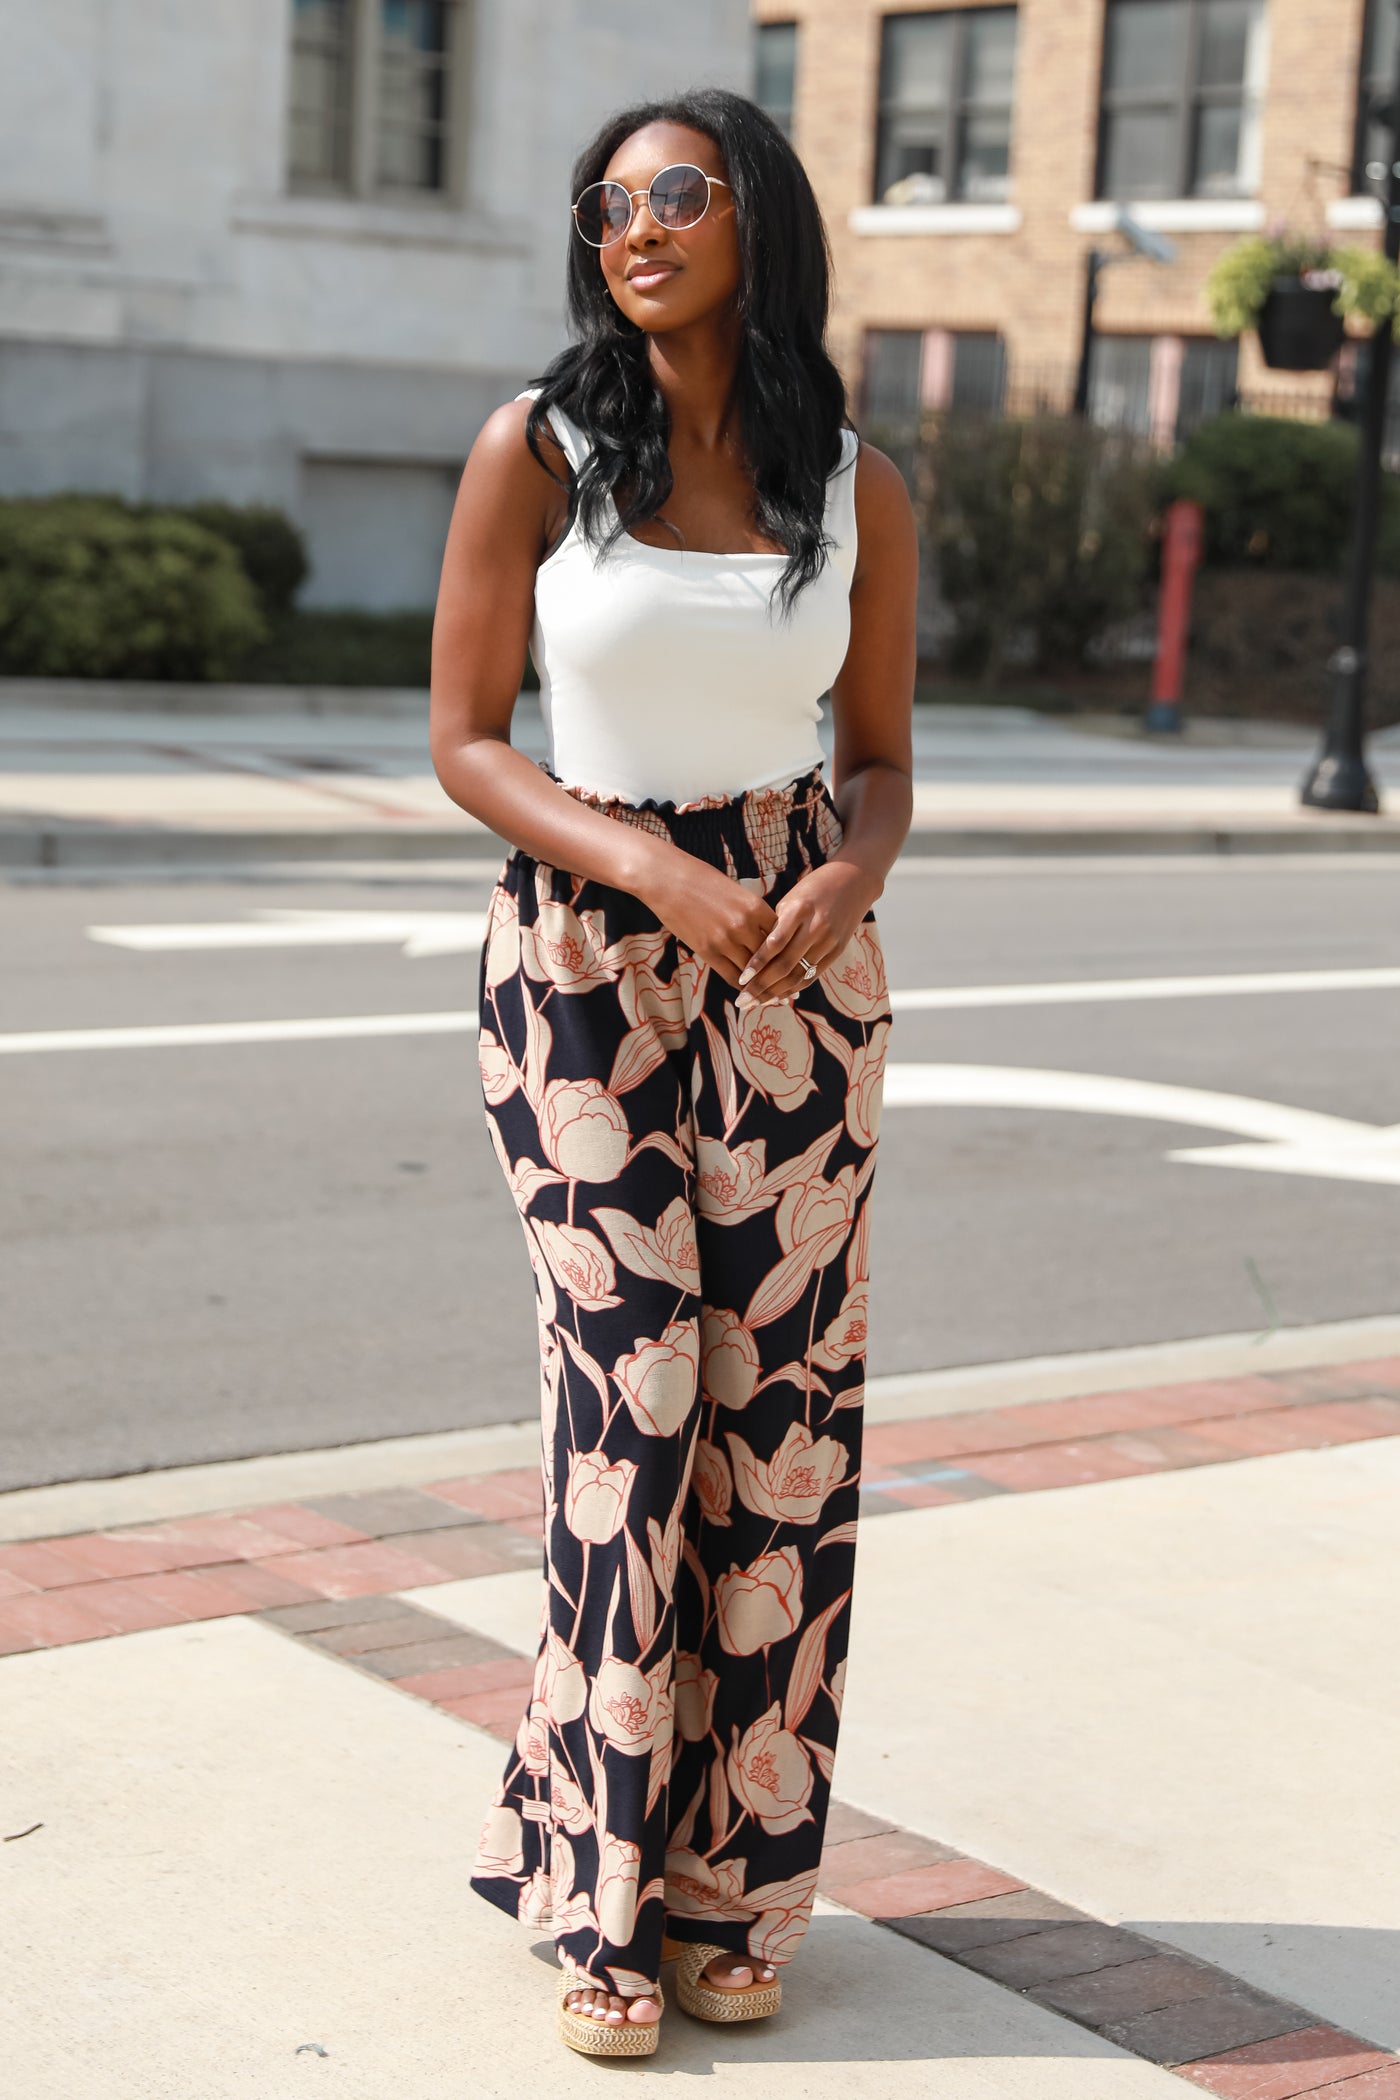 Palazzo pants outfits you will love - Learn to wear palazzo pants with style